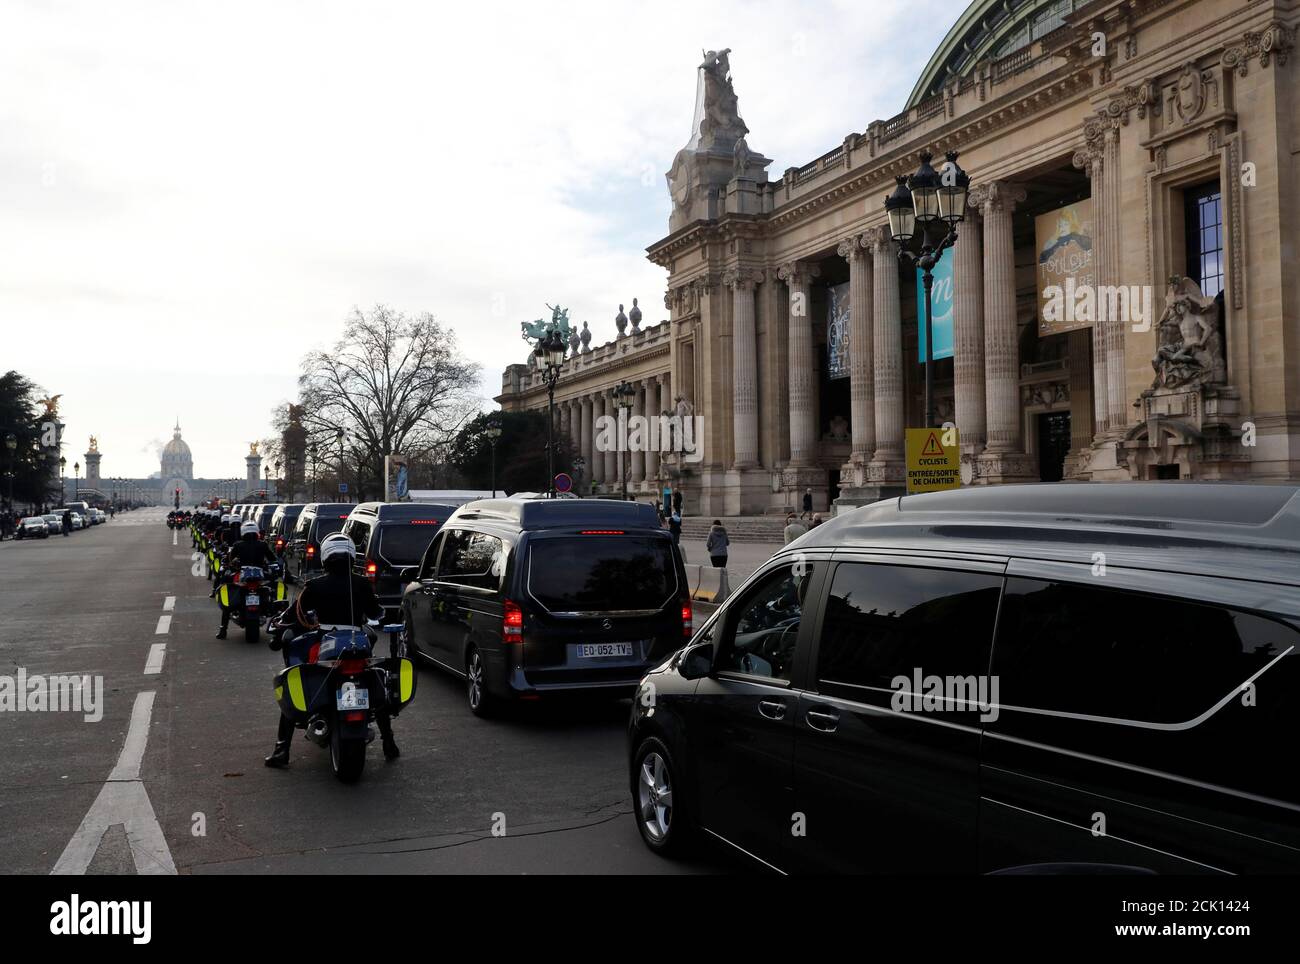 The hearses with the coffins of late thirteen French soldiers killed in Mali stand in front of the Grand Palais during a funeral convoy before a ceremony at the Hotel National des Invalides in Paris, France, December 2, 2019. French soldiers Julien Carrette, Benjamin Gireud, Romain Salles de Saint-Paul, Clement Frison-Roche, Nicolas Megard, Romain Chomel de Jarnieu, Pierre Bockel, Alex Morisse, Jeremy Leusie, Alexandre Protin, Antoine Serre, Valentin Duval, Andrei Jouk died in Mali when their helicopters collided in the dark last week as they hunted for Islamist militants.   REUTERS/Gonzalo Fu Stock Photo